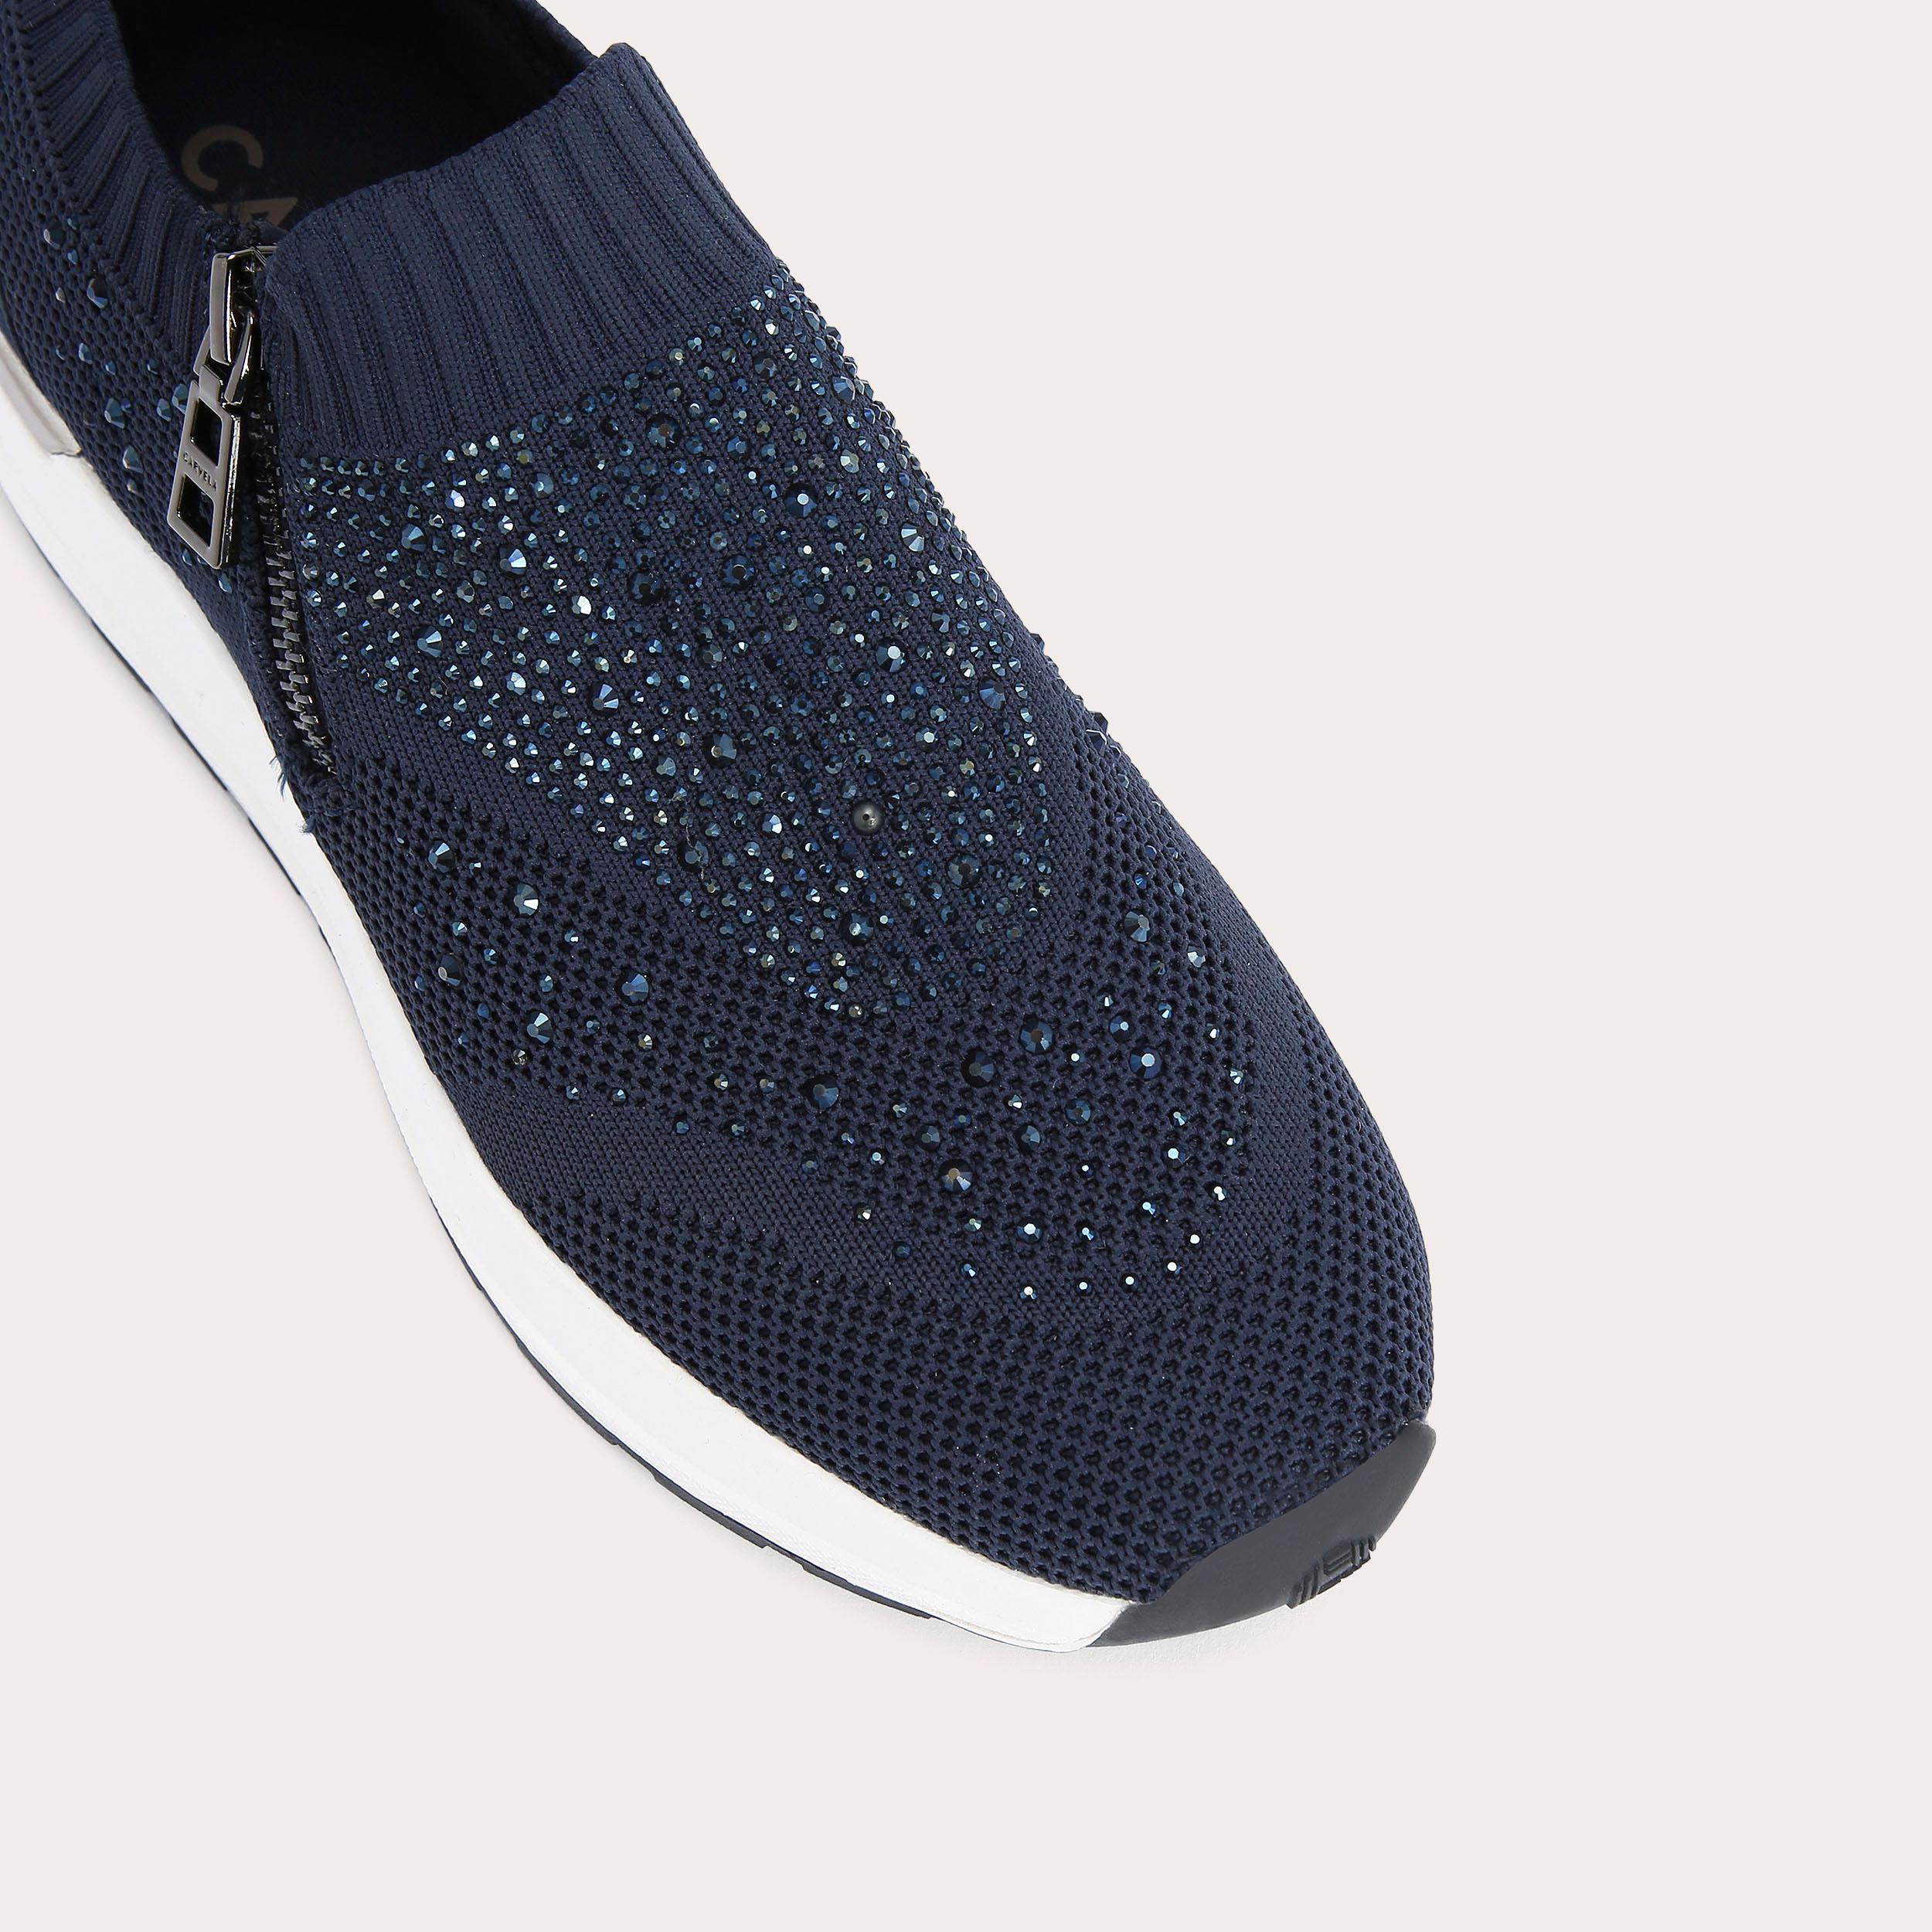 RIO ZIP Navy Trainers by CARVELA